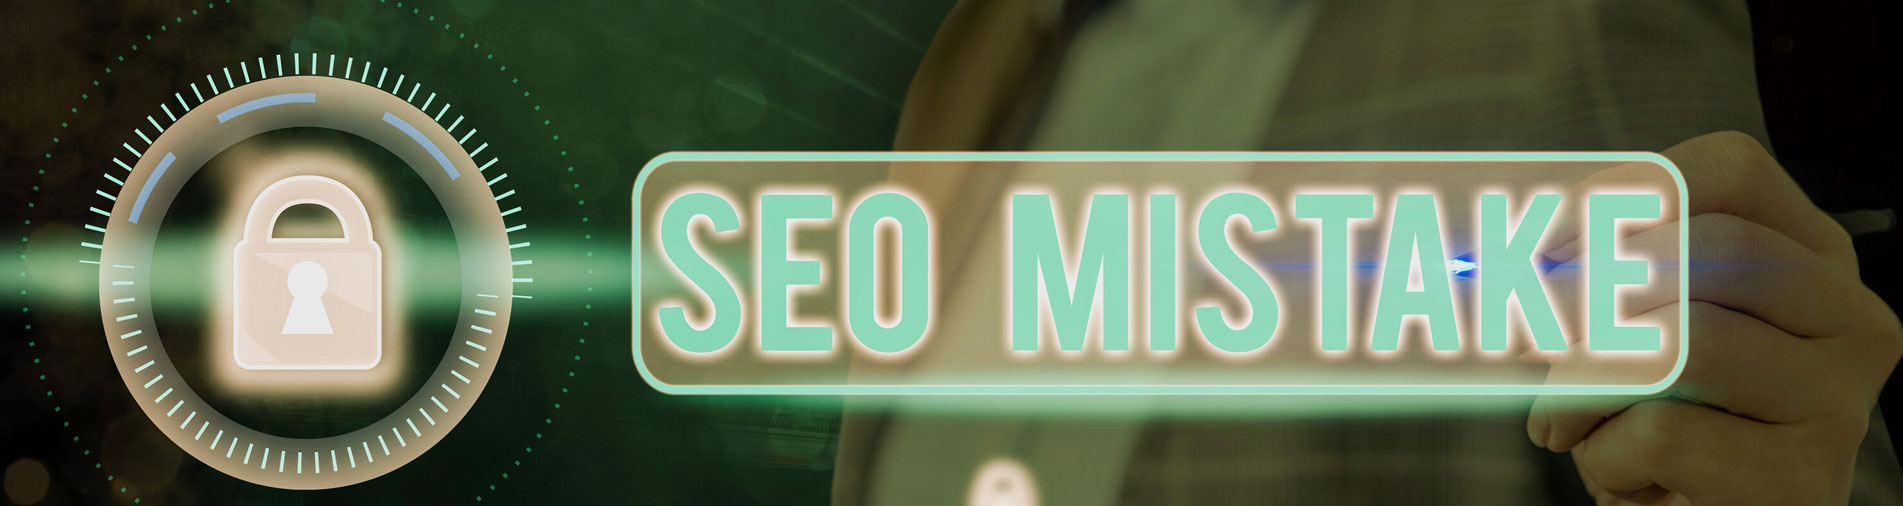 11 SEO Mistakes You Must Avoid in 2022 [Infographic]